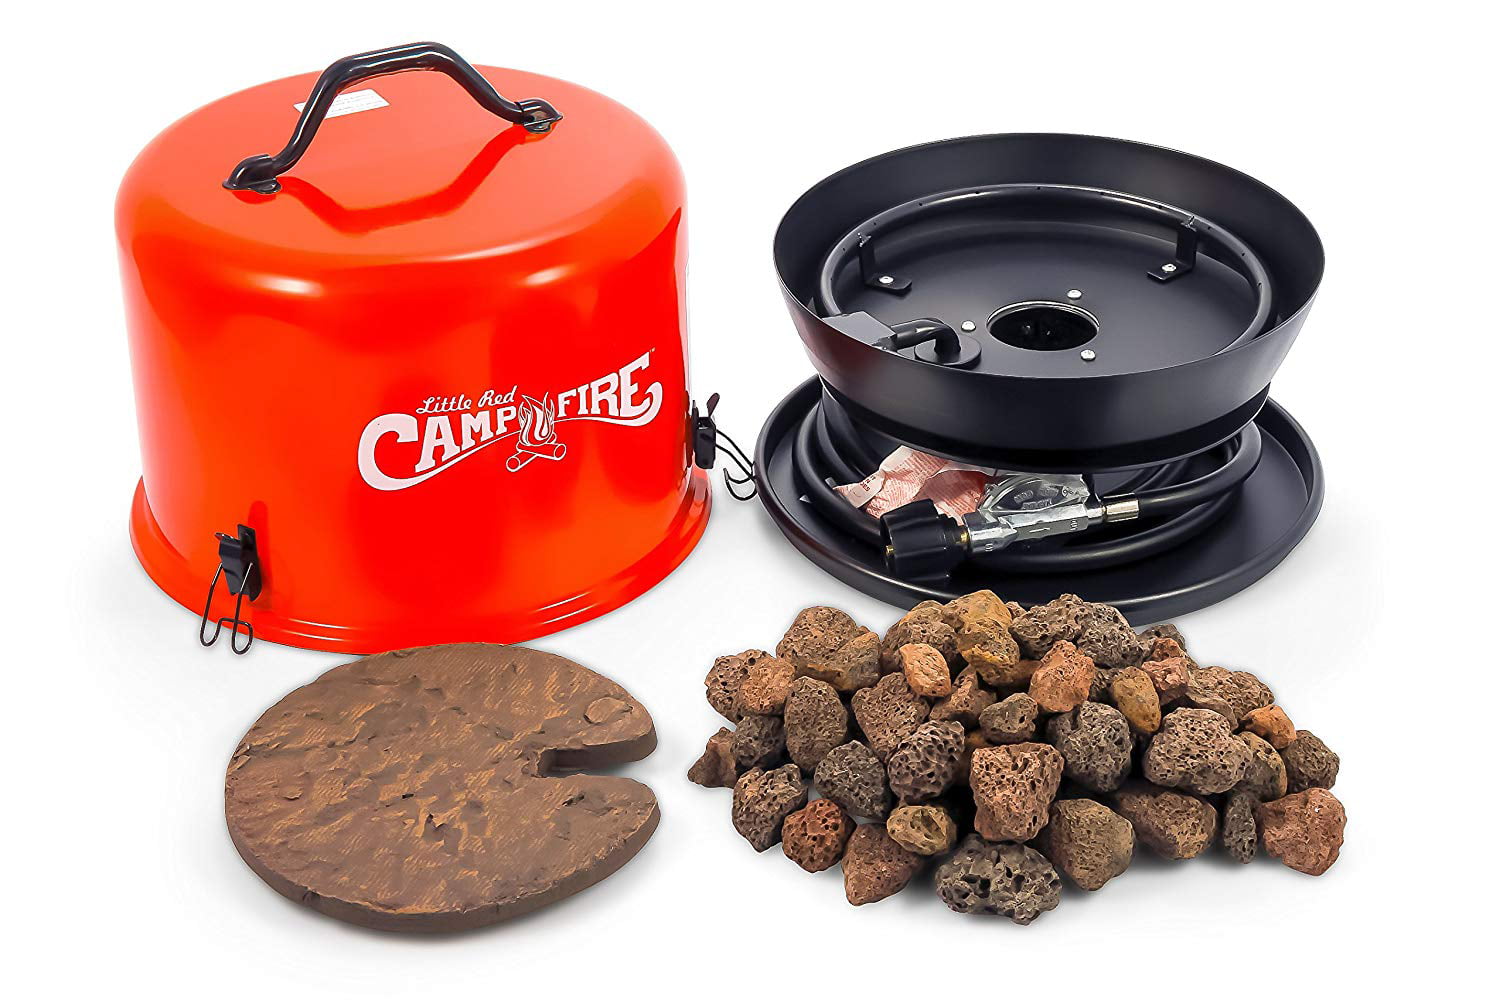 Camco Little Red Campfire 11.25-Inch Portable Propane Outdoor Camp Fire,  Approved For RV Campgrounds - 65,000 BTU's Includes 8 Foot Propane Hose ( 58031) - Walmart.com